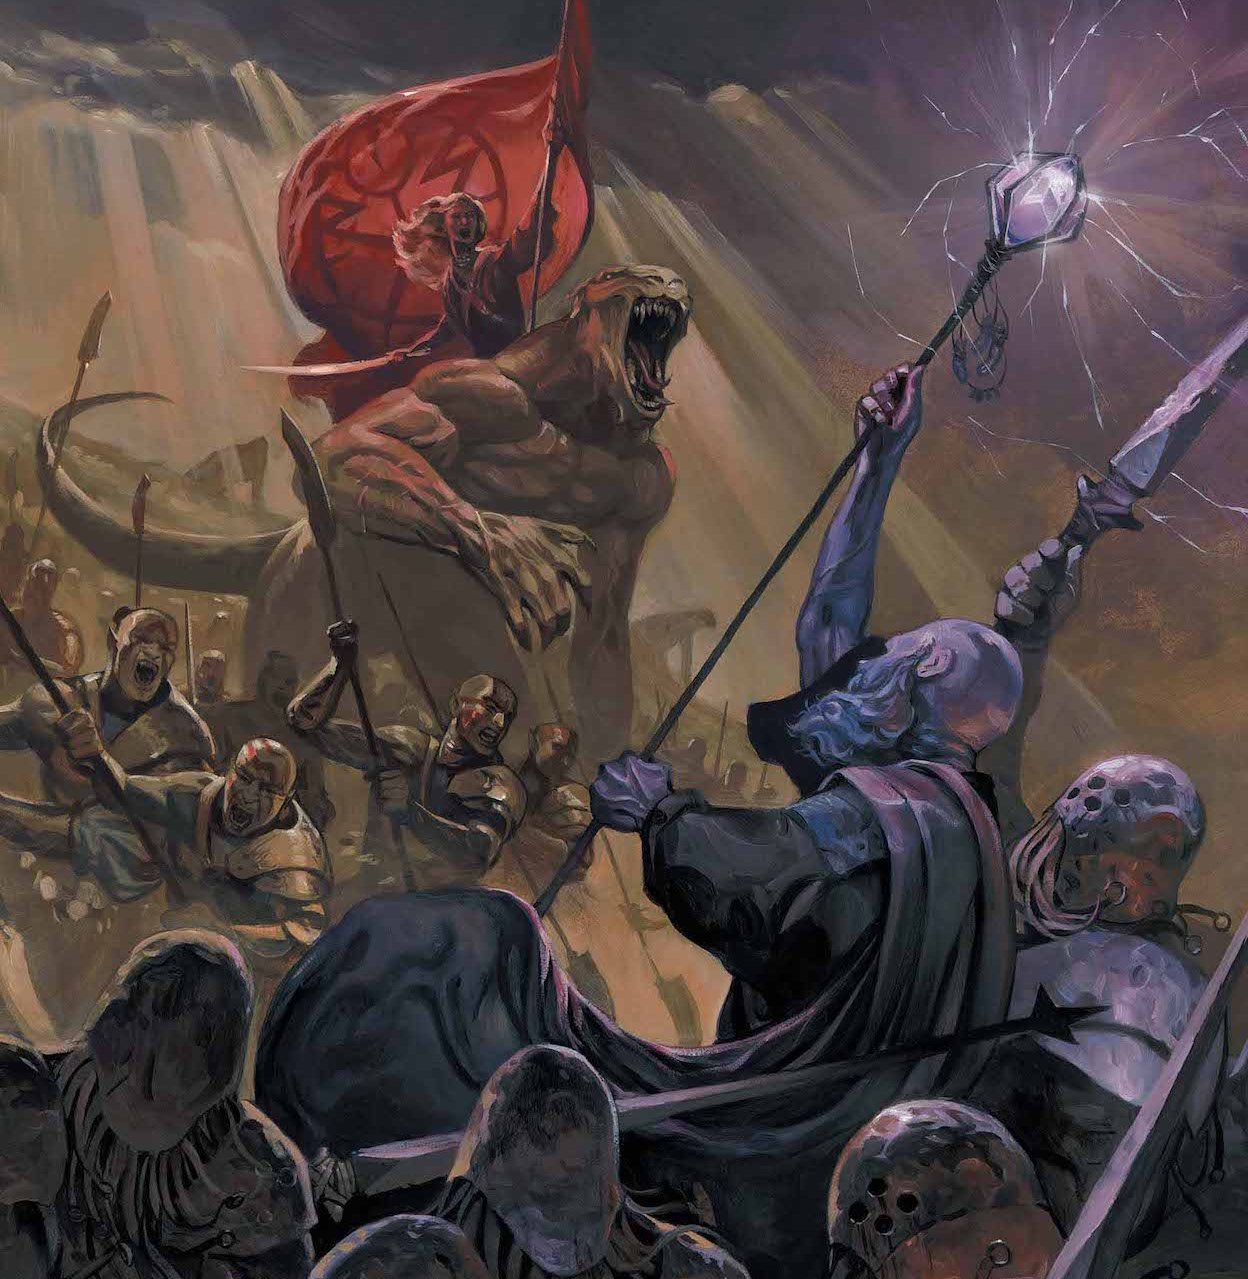 Catapult into 'The Last God Sourcebook' #1 for DnD-style play: An interview with Phillip Kennedy Johnson and Dan Telfer